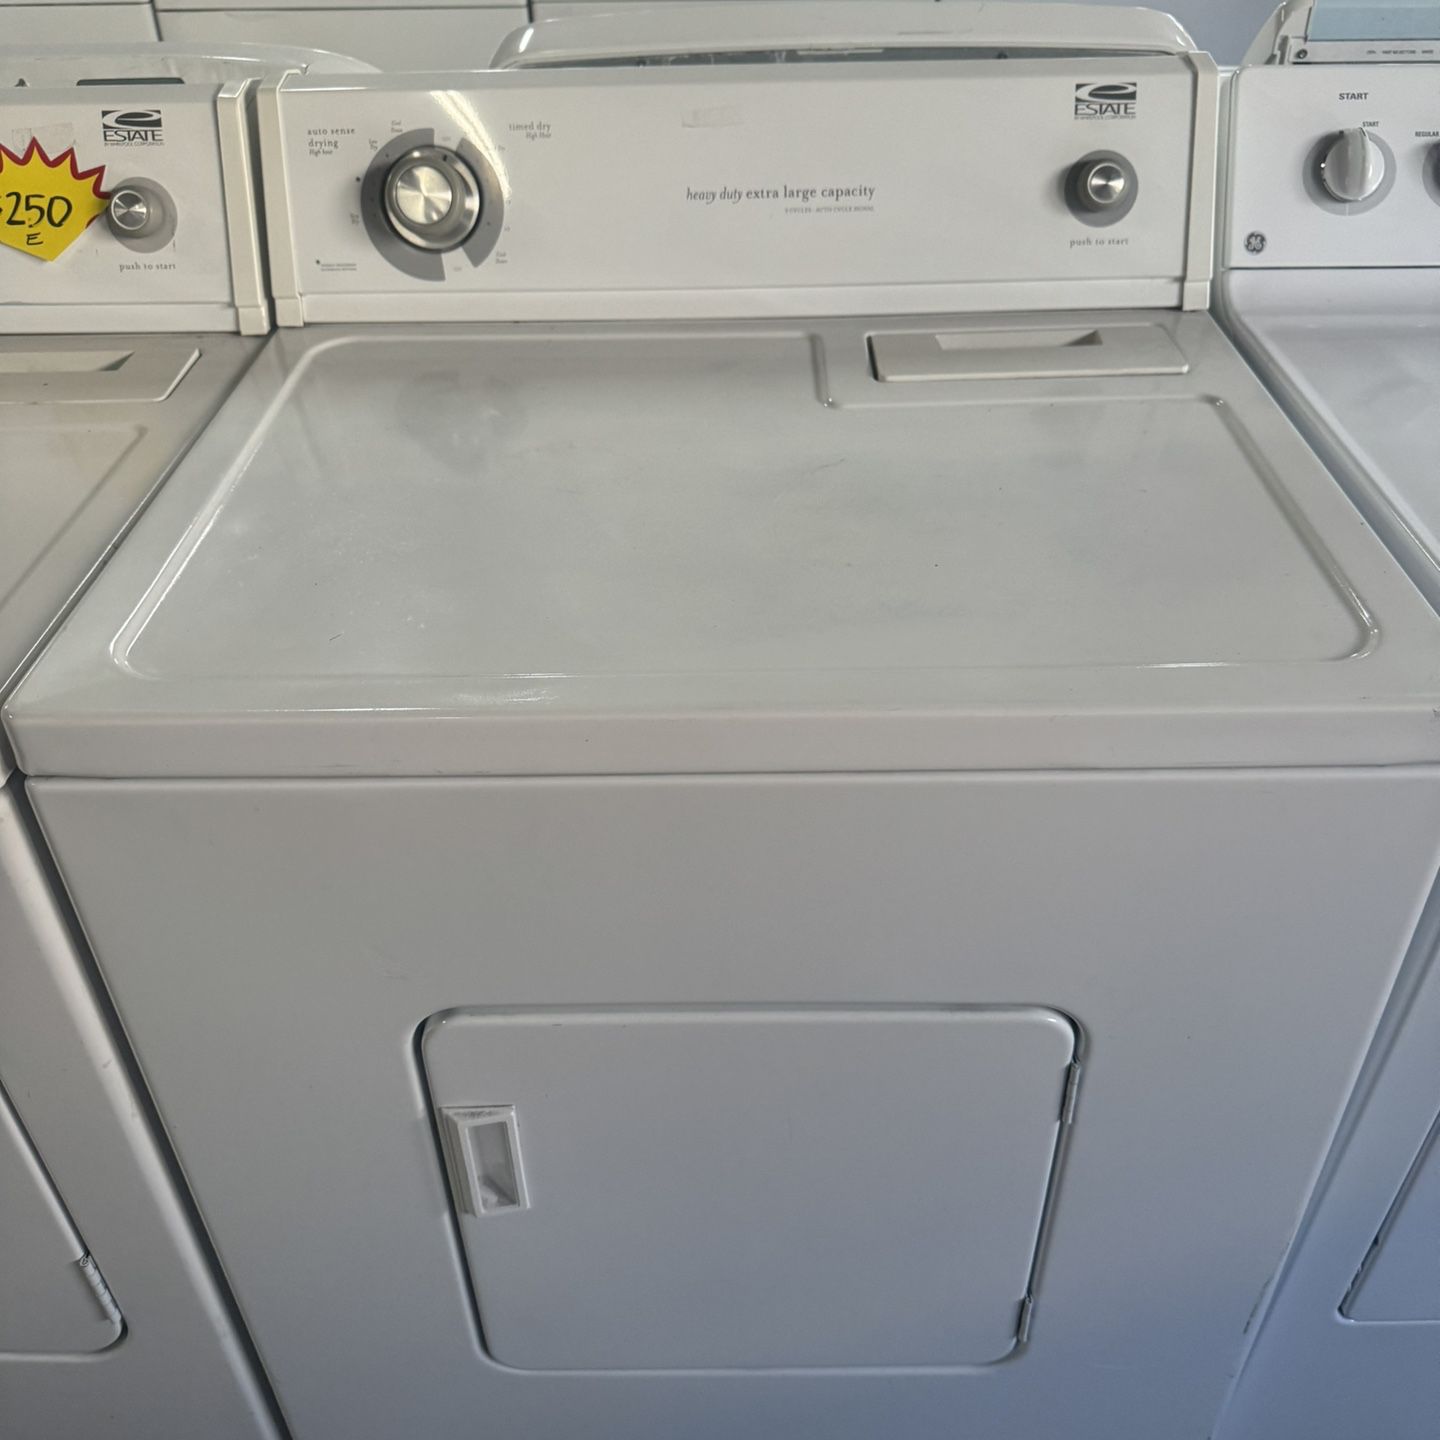 USED ESTATE ELECTRIC DRYER 